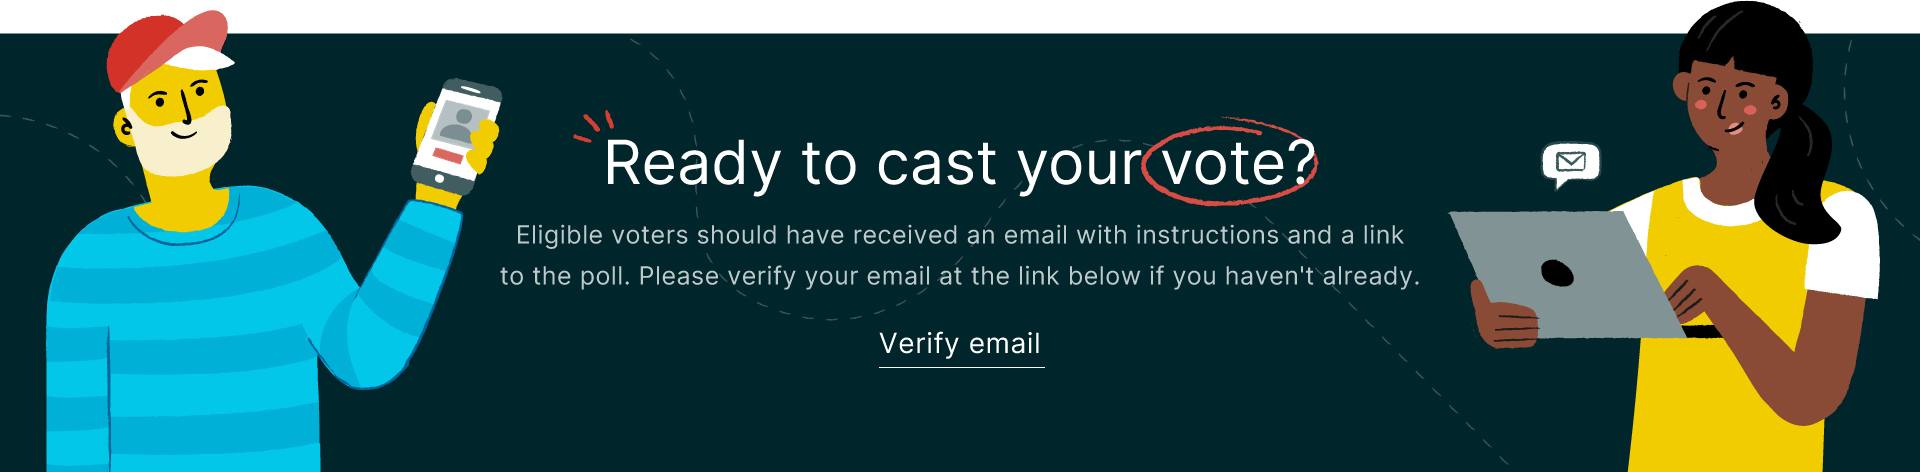 illustrated banner and link for voters to verify email address